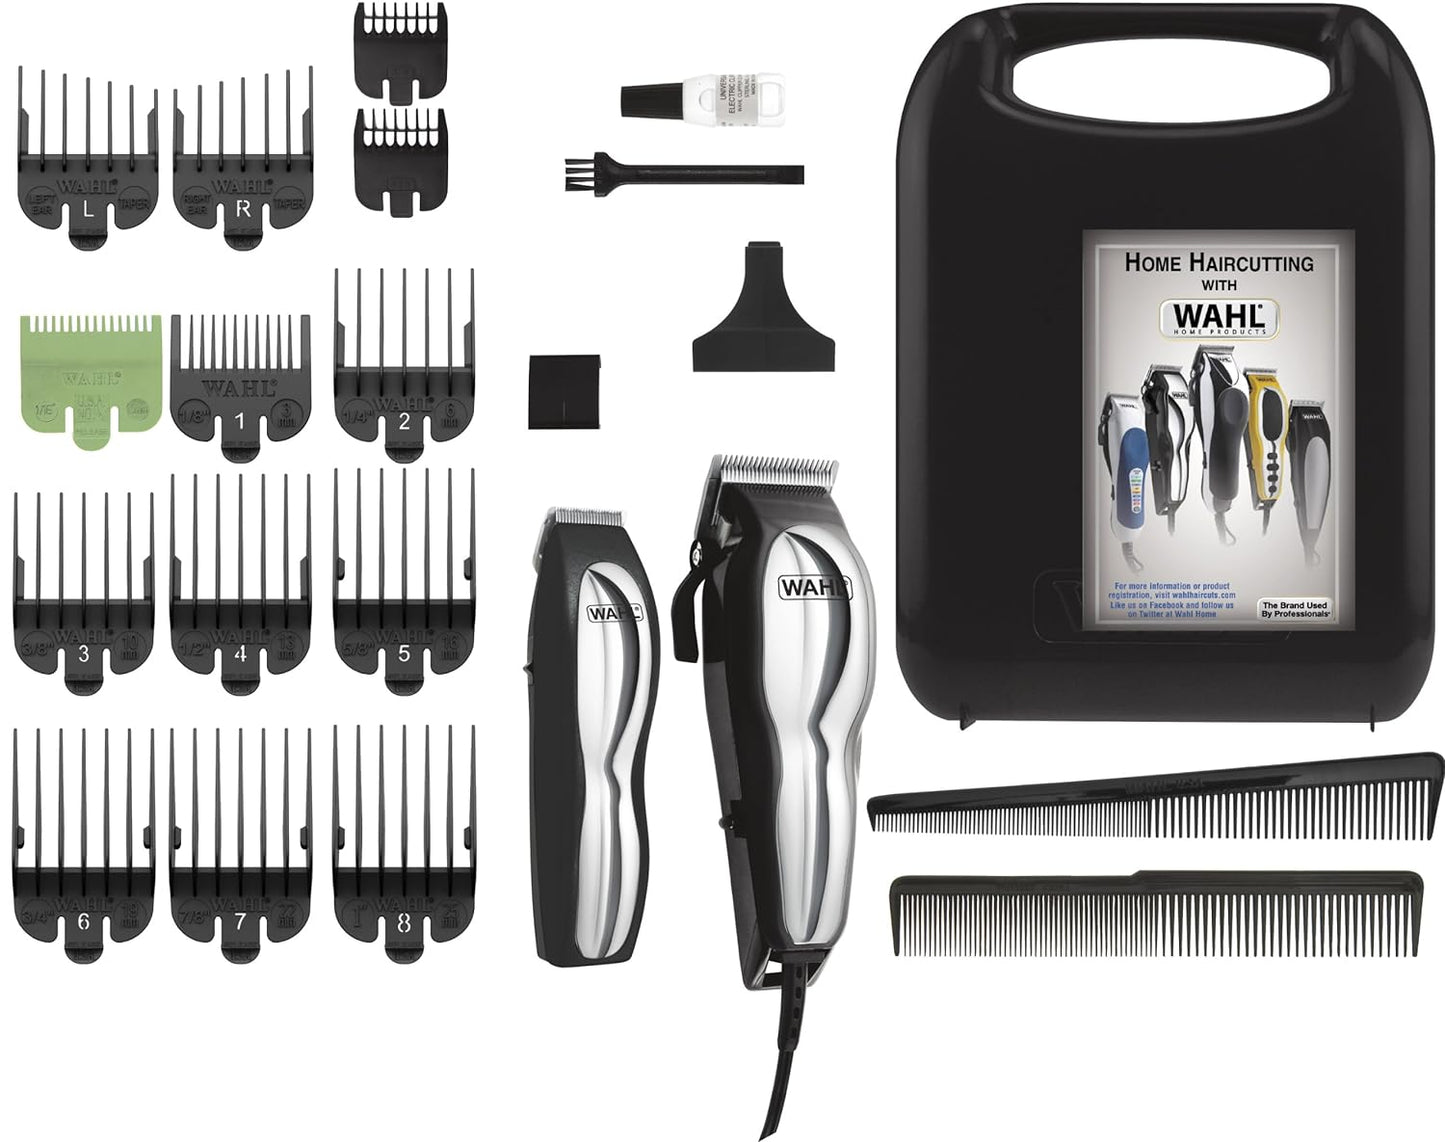 WAHL 79520-340 Chrome Pro 22 Piece Complete Haircutting Kit